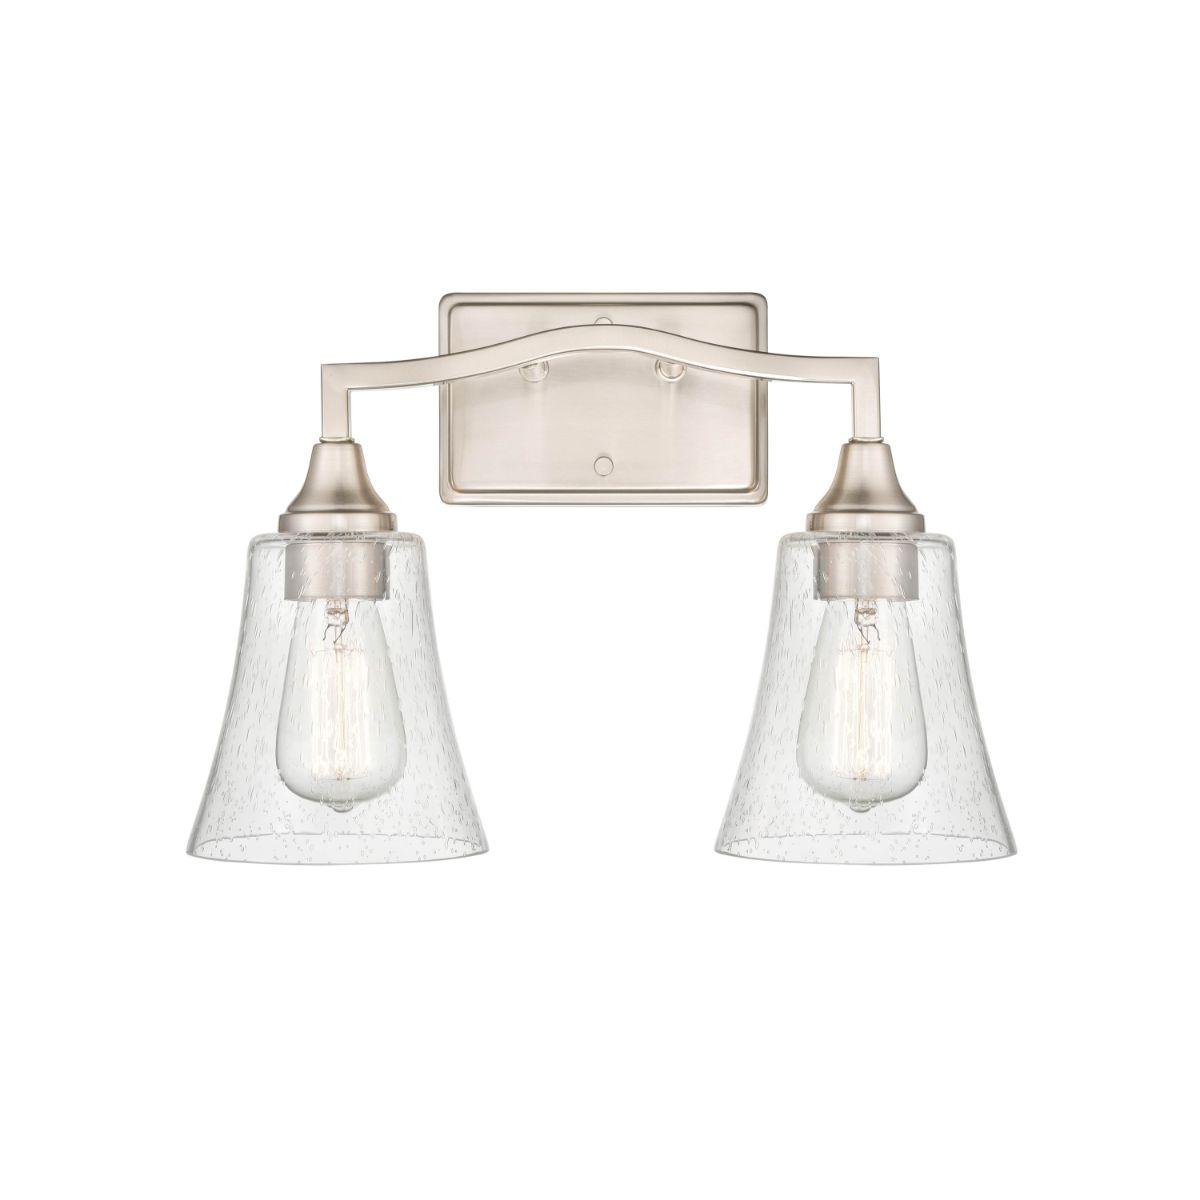 Caily 16 in 2 Lights Vanity Light